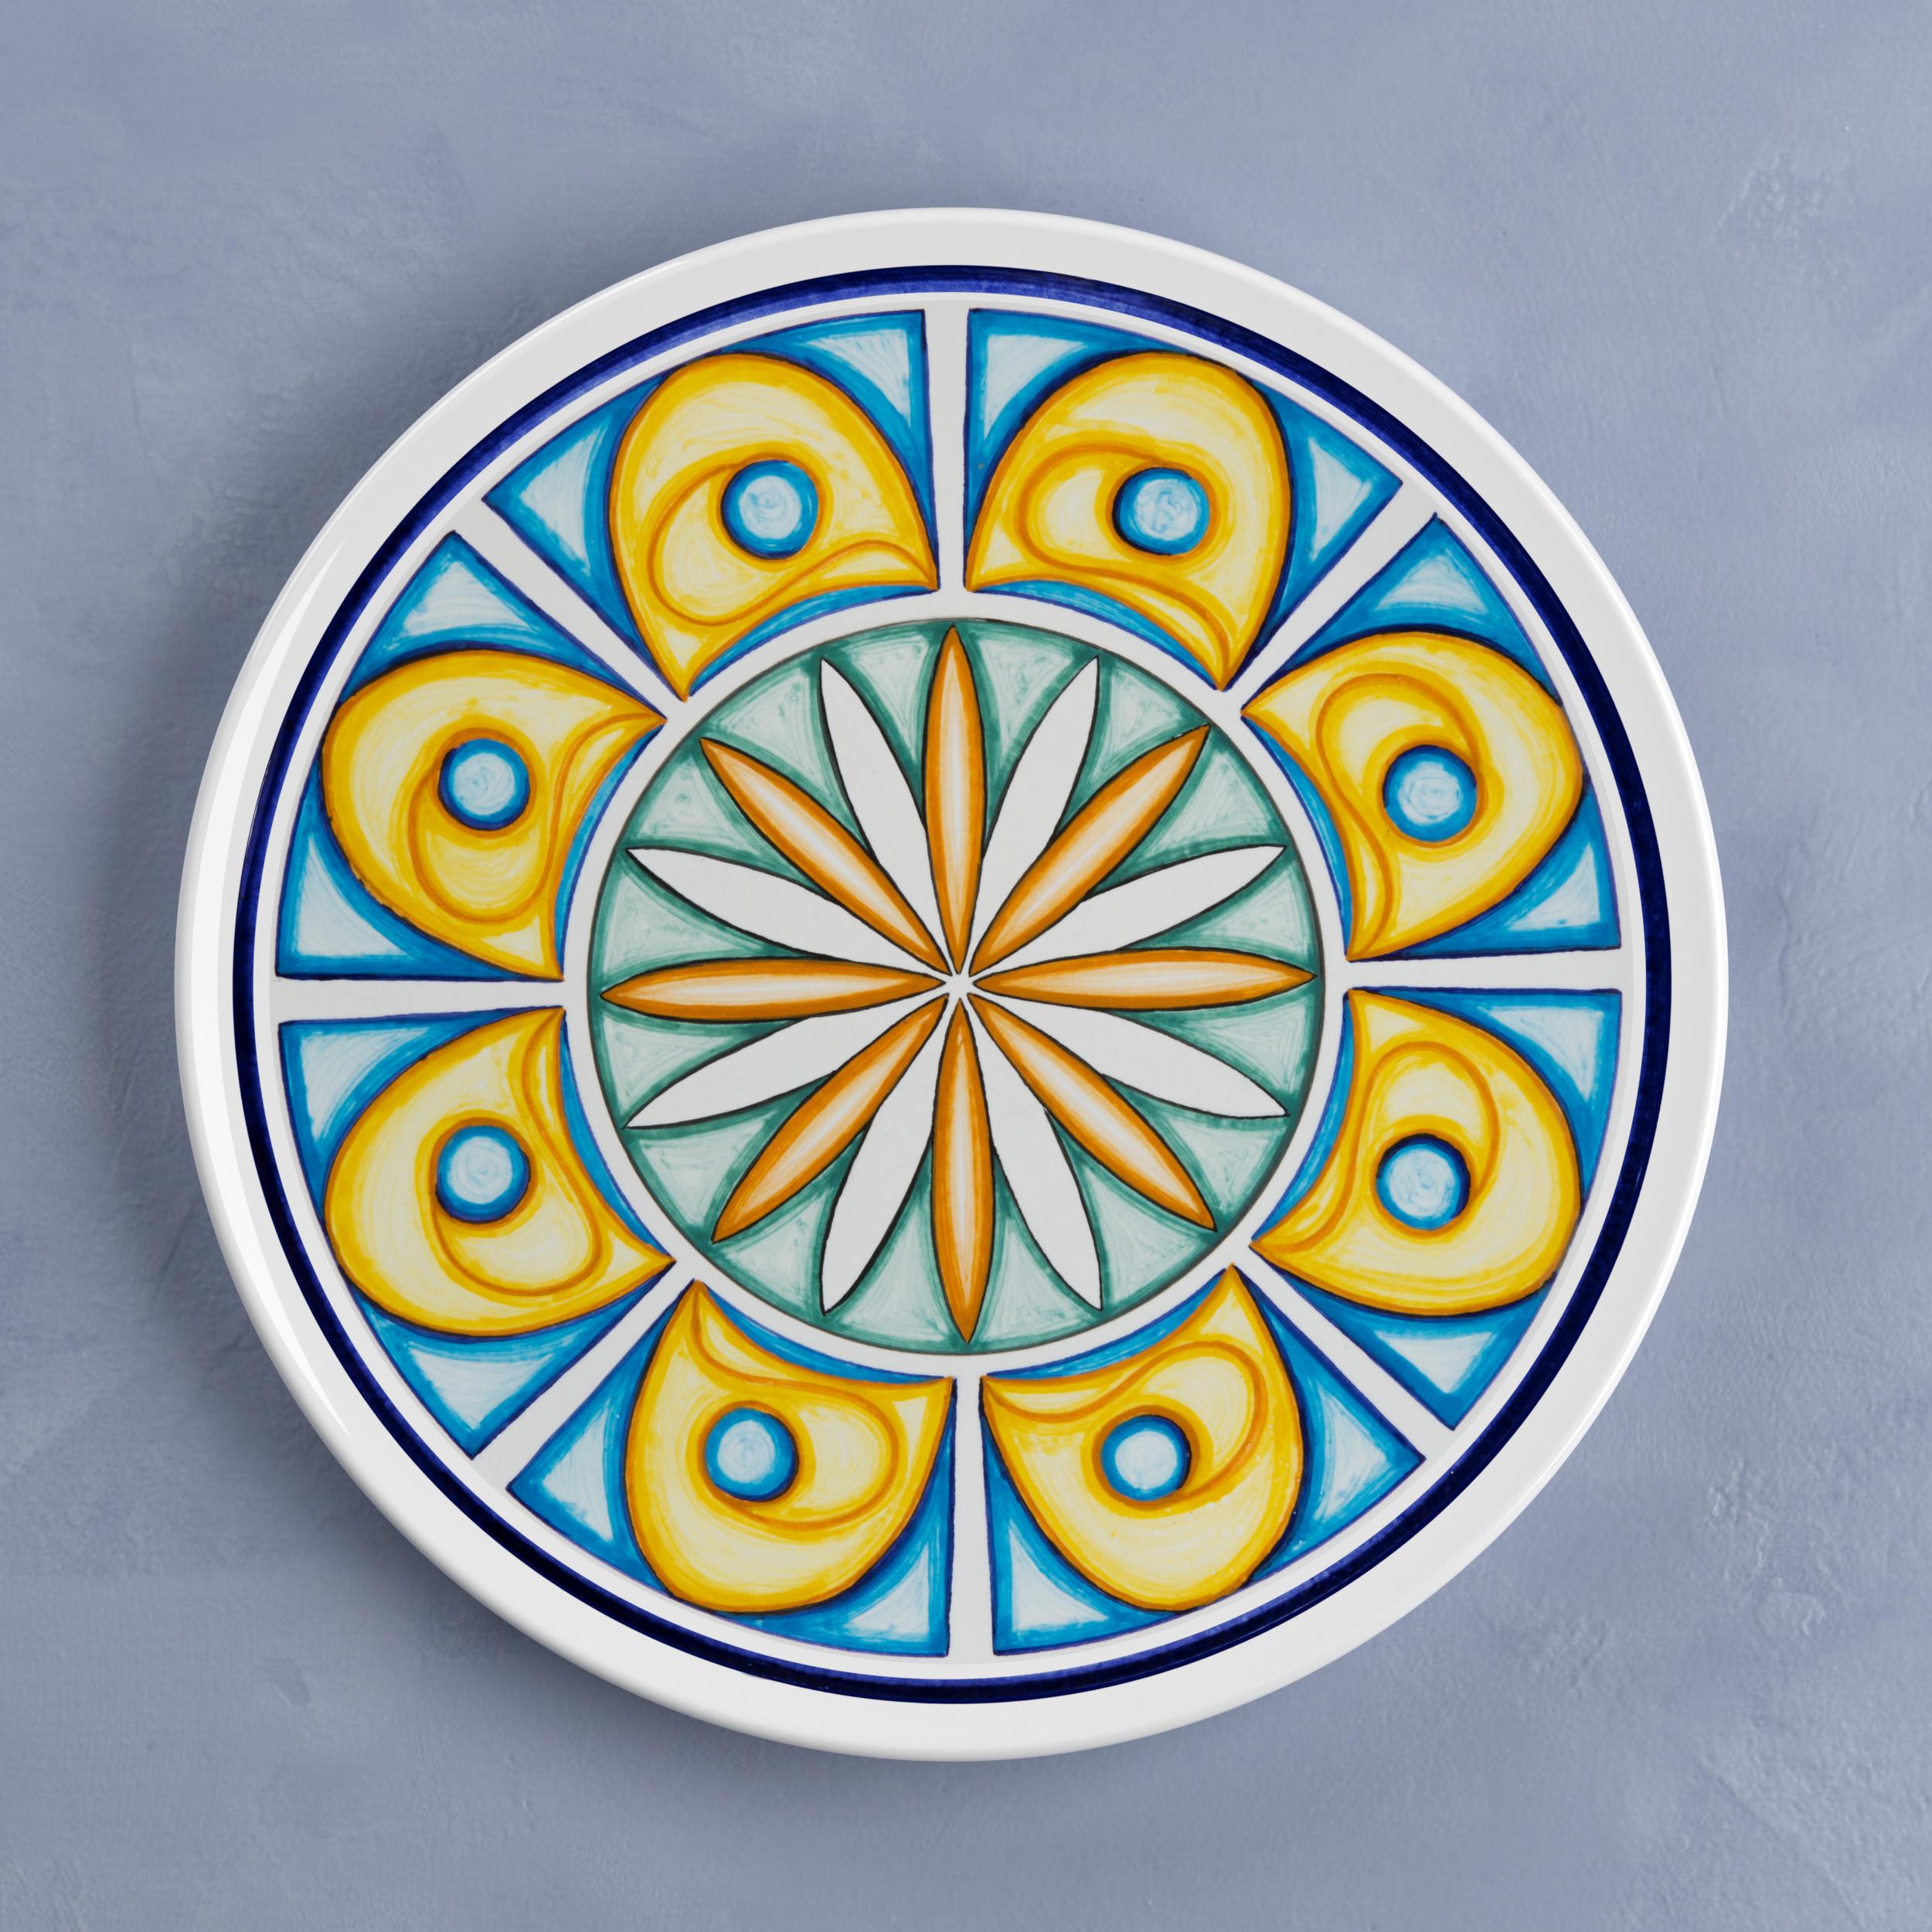 Beautiful set of 3 Sicilian Clay Colapesce handcrafted dinner plates by Crisodora will make an elegant statement with sophisticated Art de la table for every occasion.

Hand-painted

Made in Sicily (Italy) by Master Artisans.